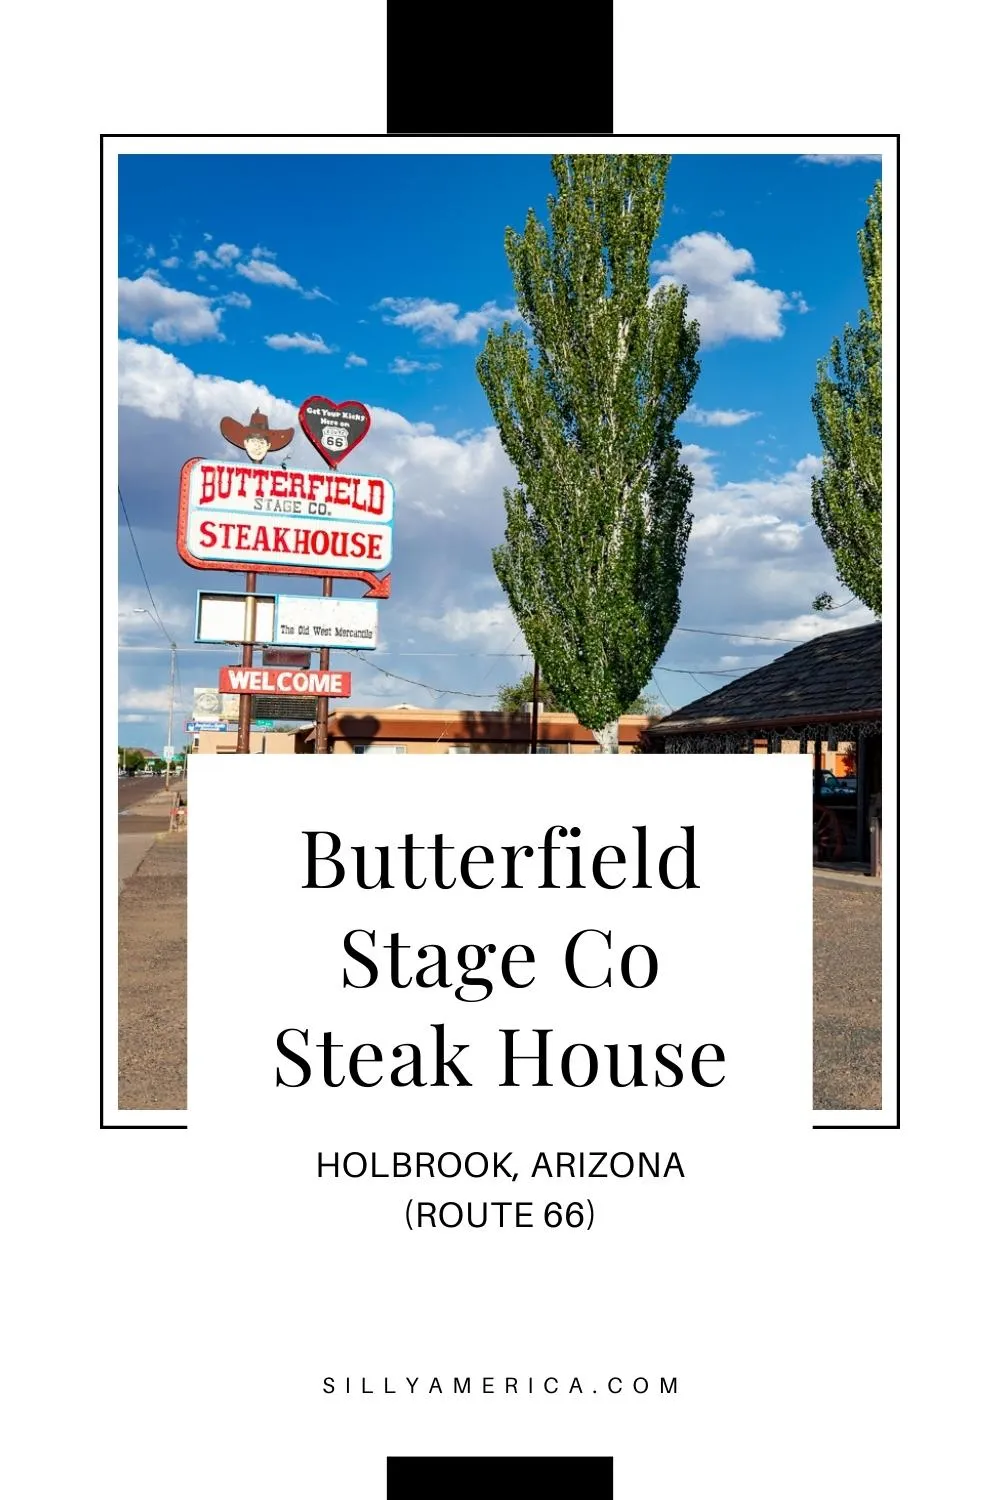 Hungry in Holbrook? Butterfield Stage Co Steak House in Holbrook, Arizona won't disappoint. Visit this western-themed steak house on a Route 66 road trip for a juicy steak dinner. Look for the stagecoach on the roof and neon sign for this Route 66 restaurant in Arizona. #Route66 #Route66RoadTrip #ArizonaRoute66 #HolbrookArizona